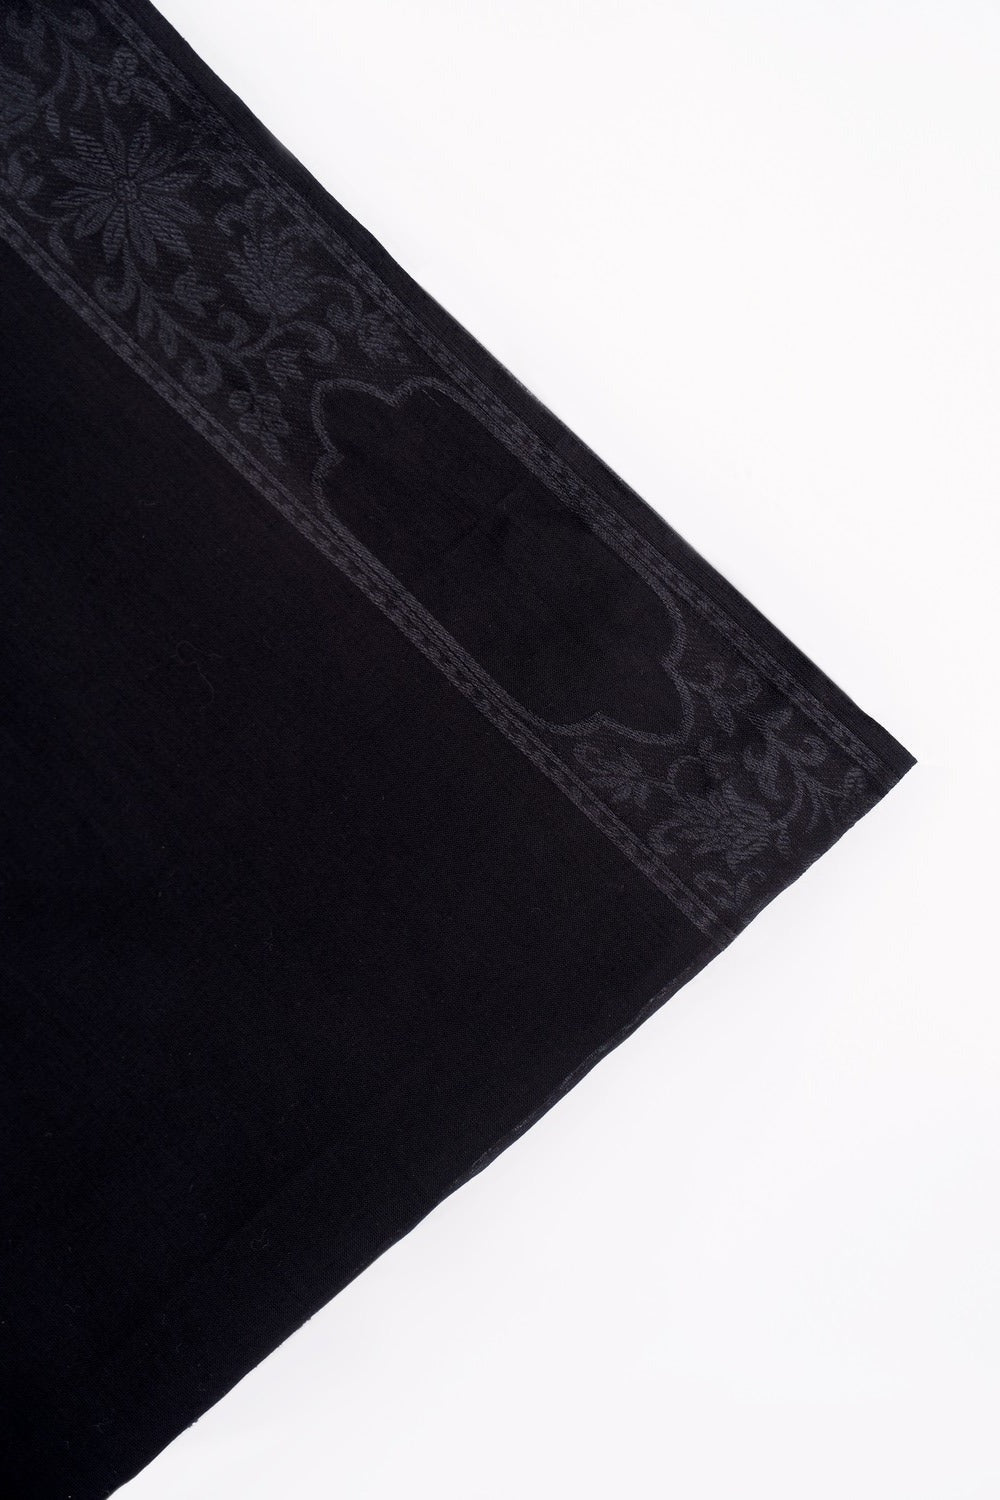 Black Lawn Kaani Styled Border For Women